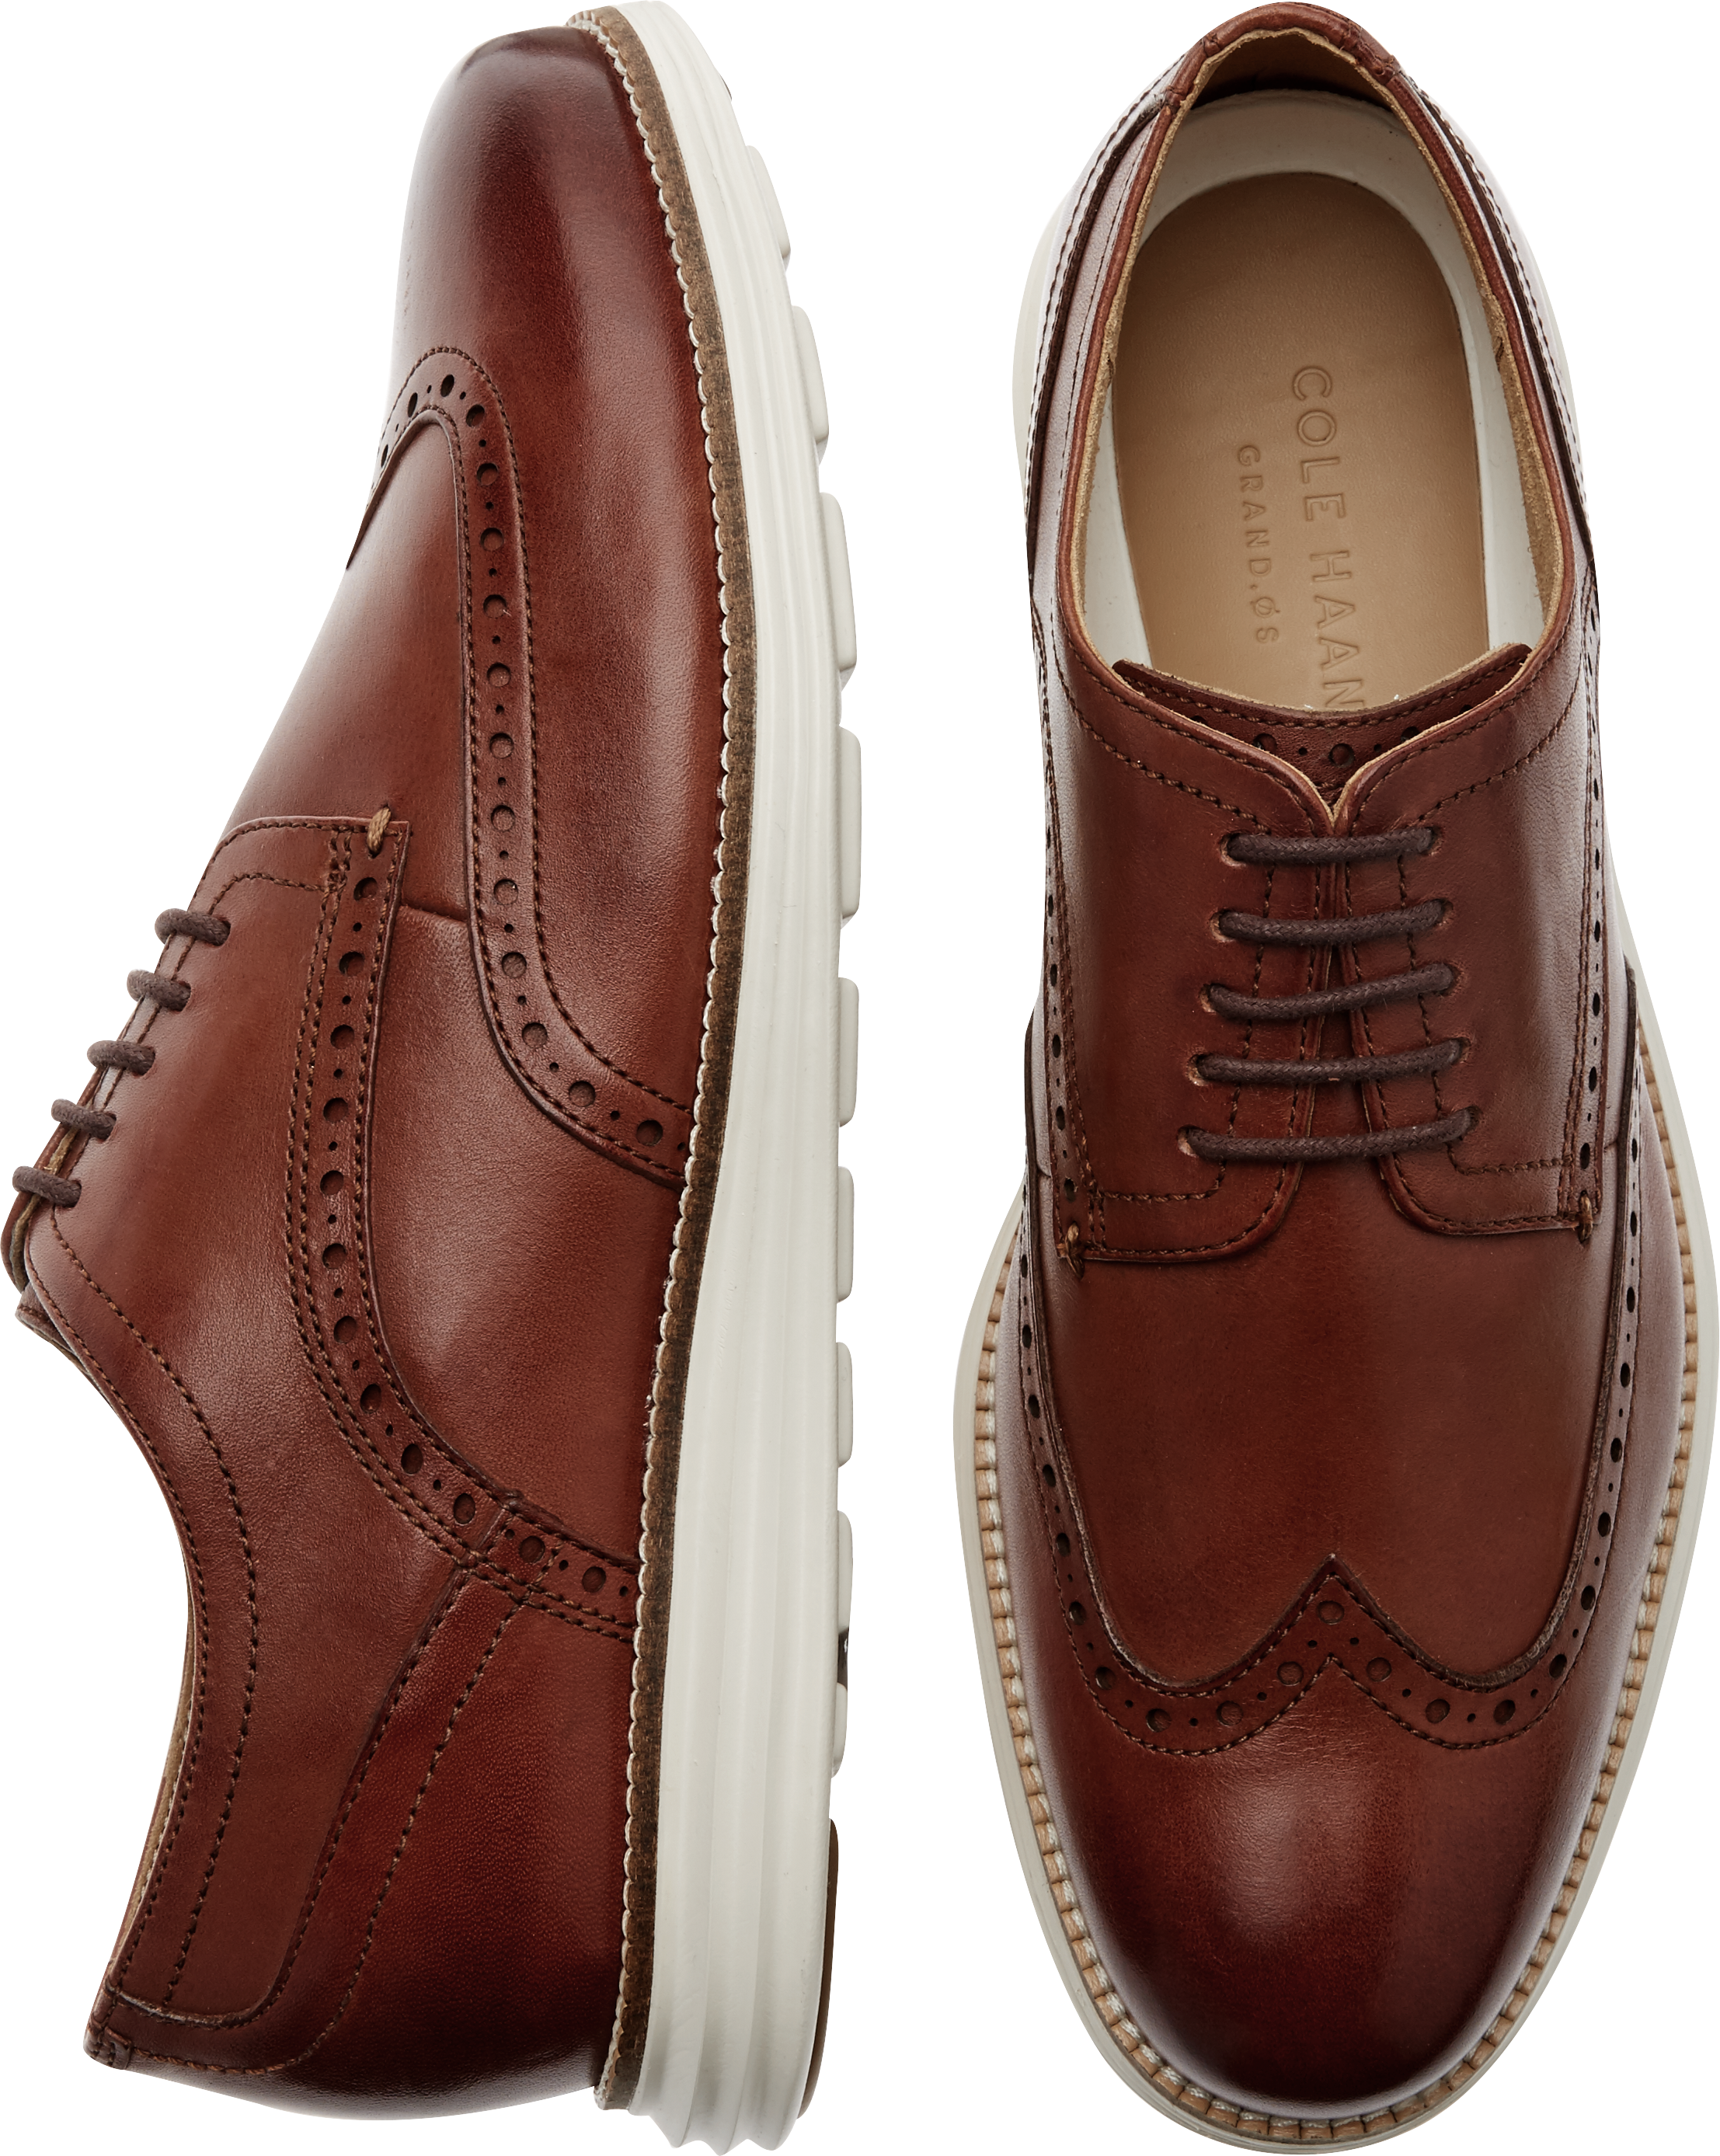 What Is Cole Haan Grand? - Shoe Effect